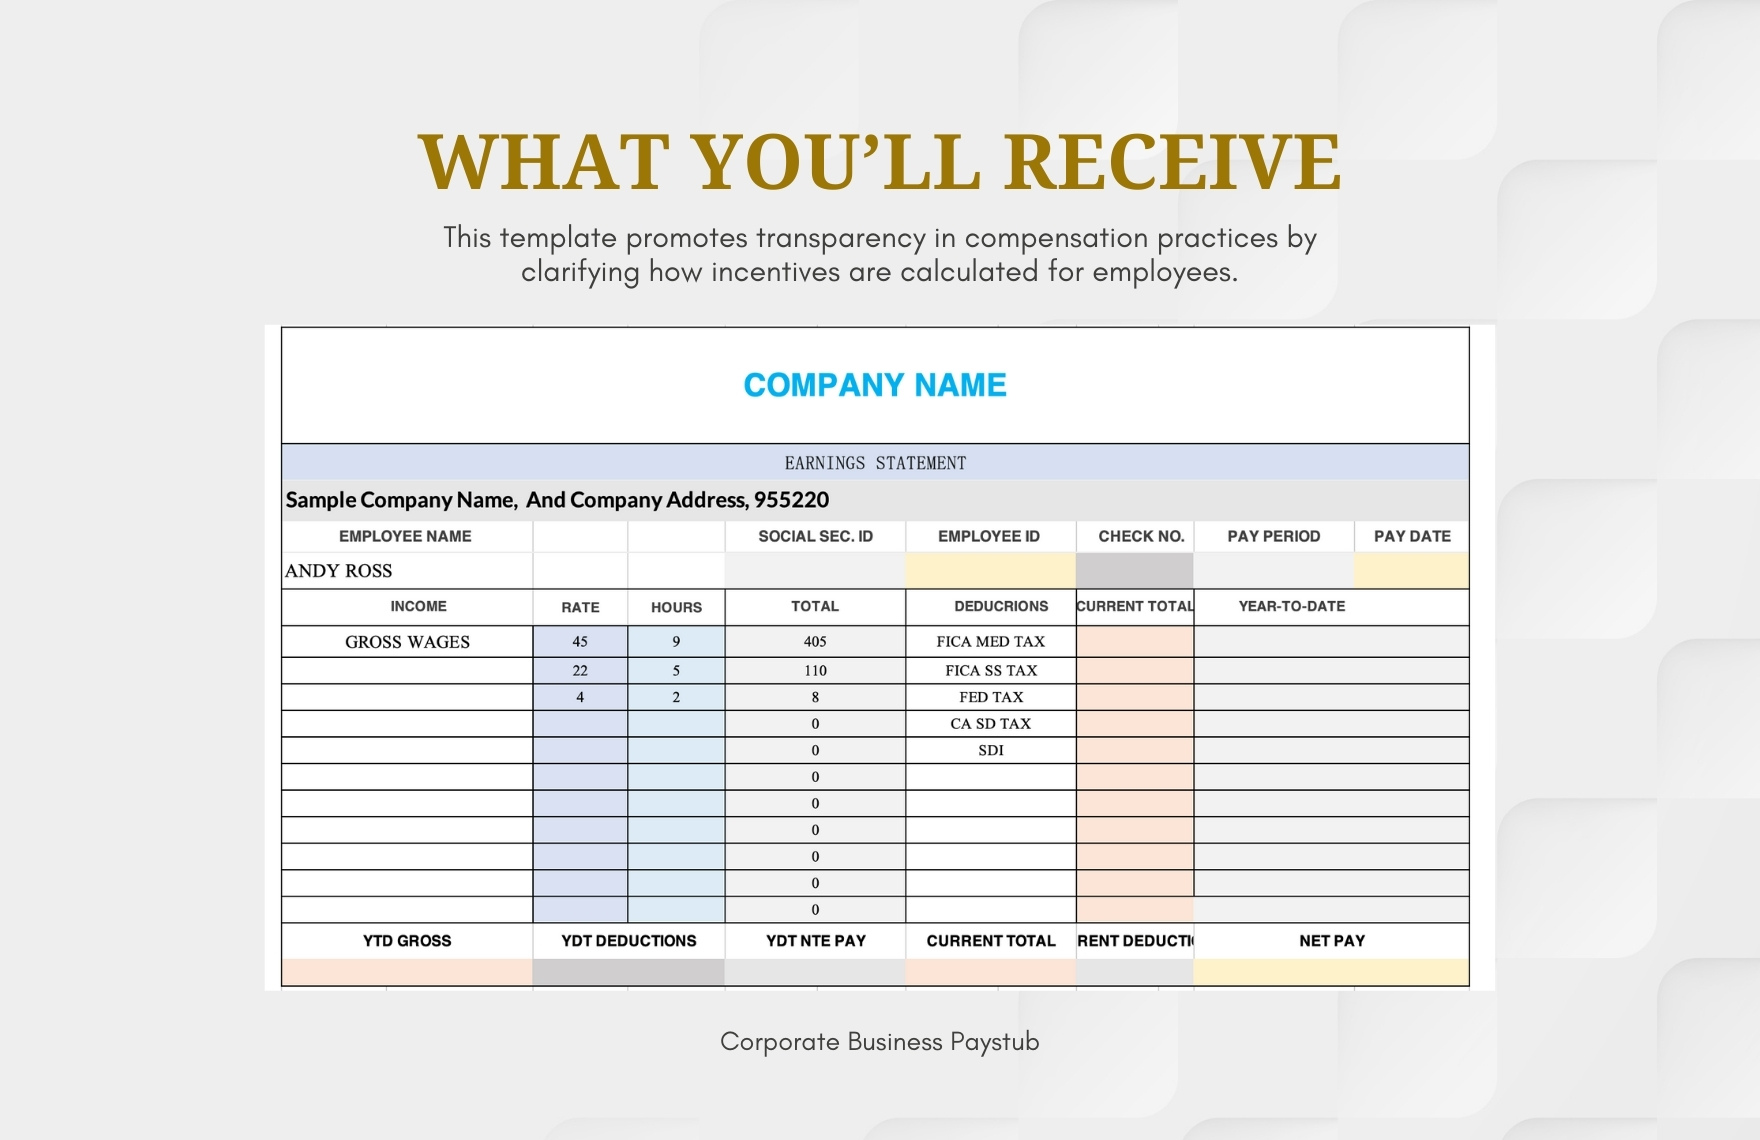 Corporate Business Paystub Template